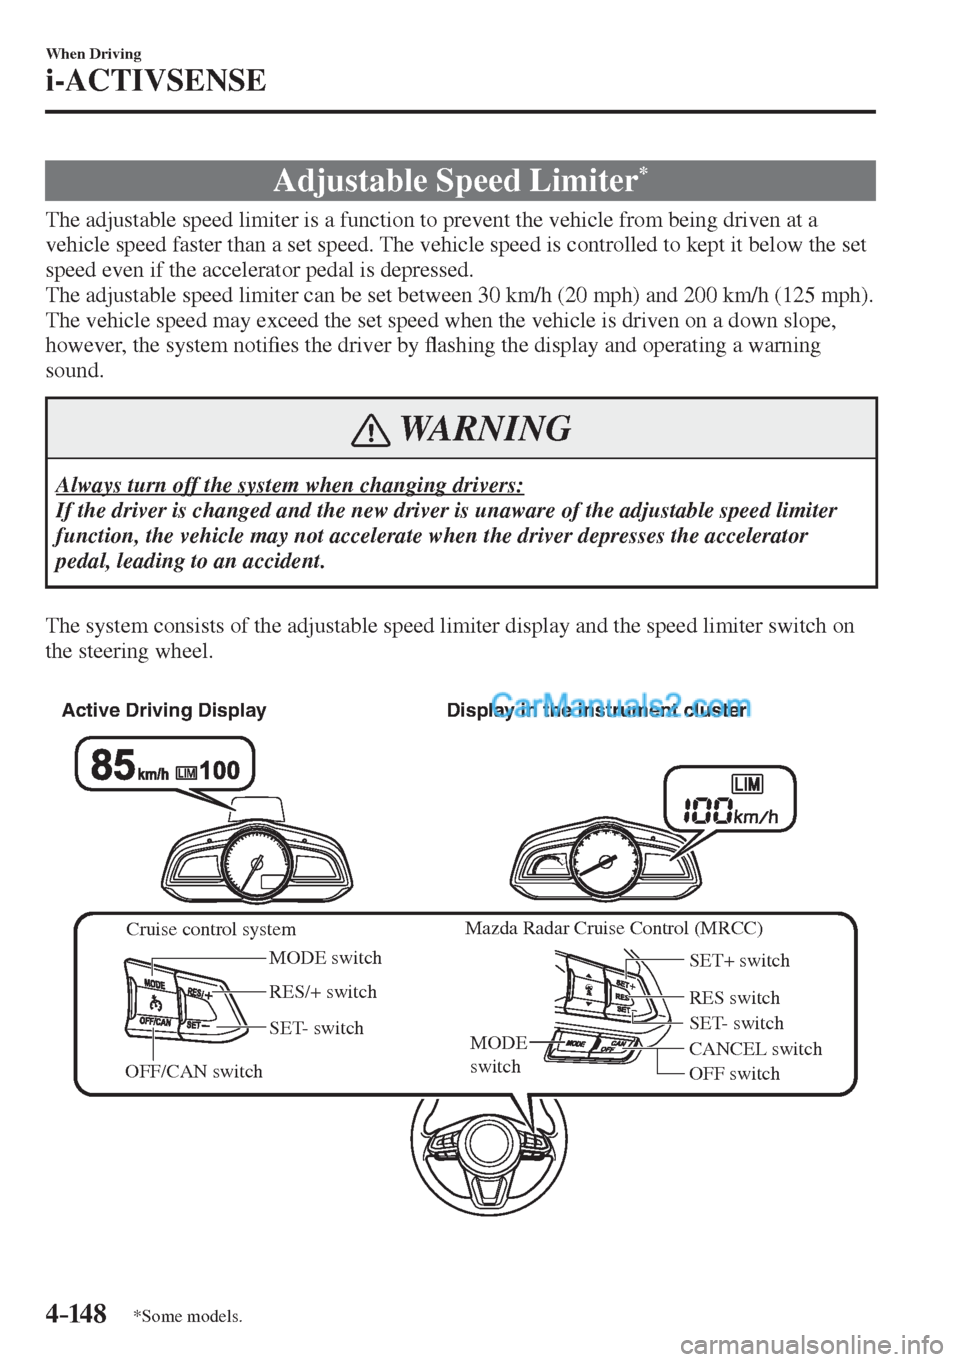 MAZDA MODEL 2 2017  Owners Manual (in English) 4–14 8
When Driving
i-ACTIVSENSE
*Some models.
 Adjustable Speed Limiter * 
              The adjustable speed limiter is a function to prevent the vehicle from being driven at a 
vehicle speed fast